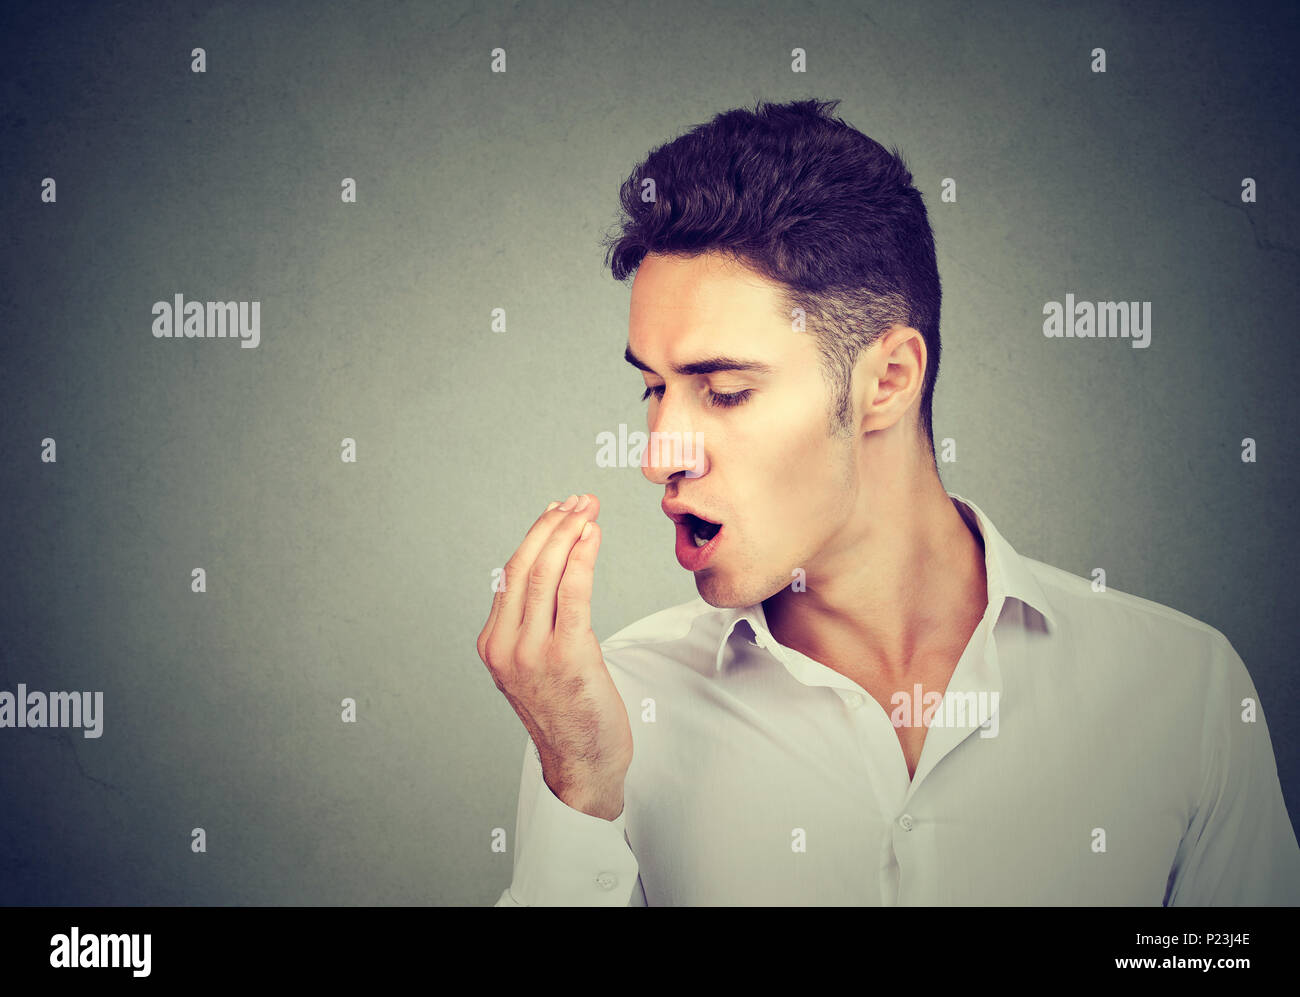 Young man checking his breath with hand. Stock Photo